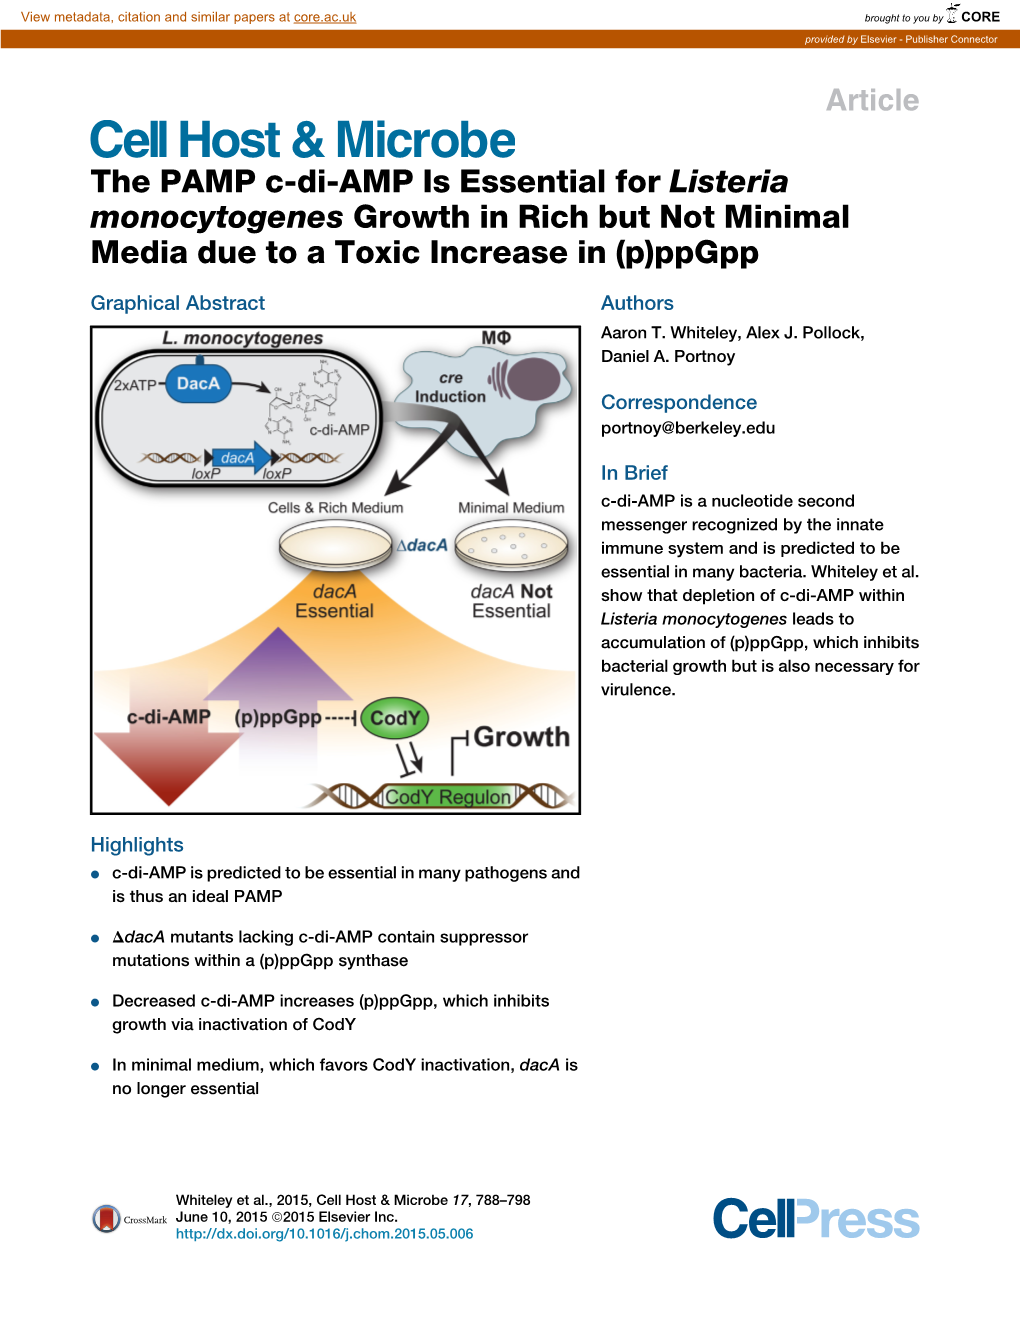 The PAMP C-Di-AMP Is Essential for Listeria Monocytogenes Growth in Rich but Not Minimal Media Due to a Toxic Increase in (P)Ppgpp